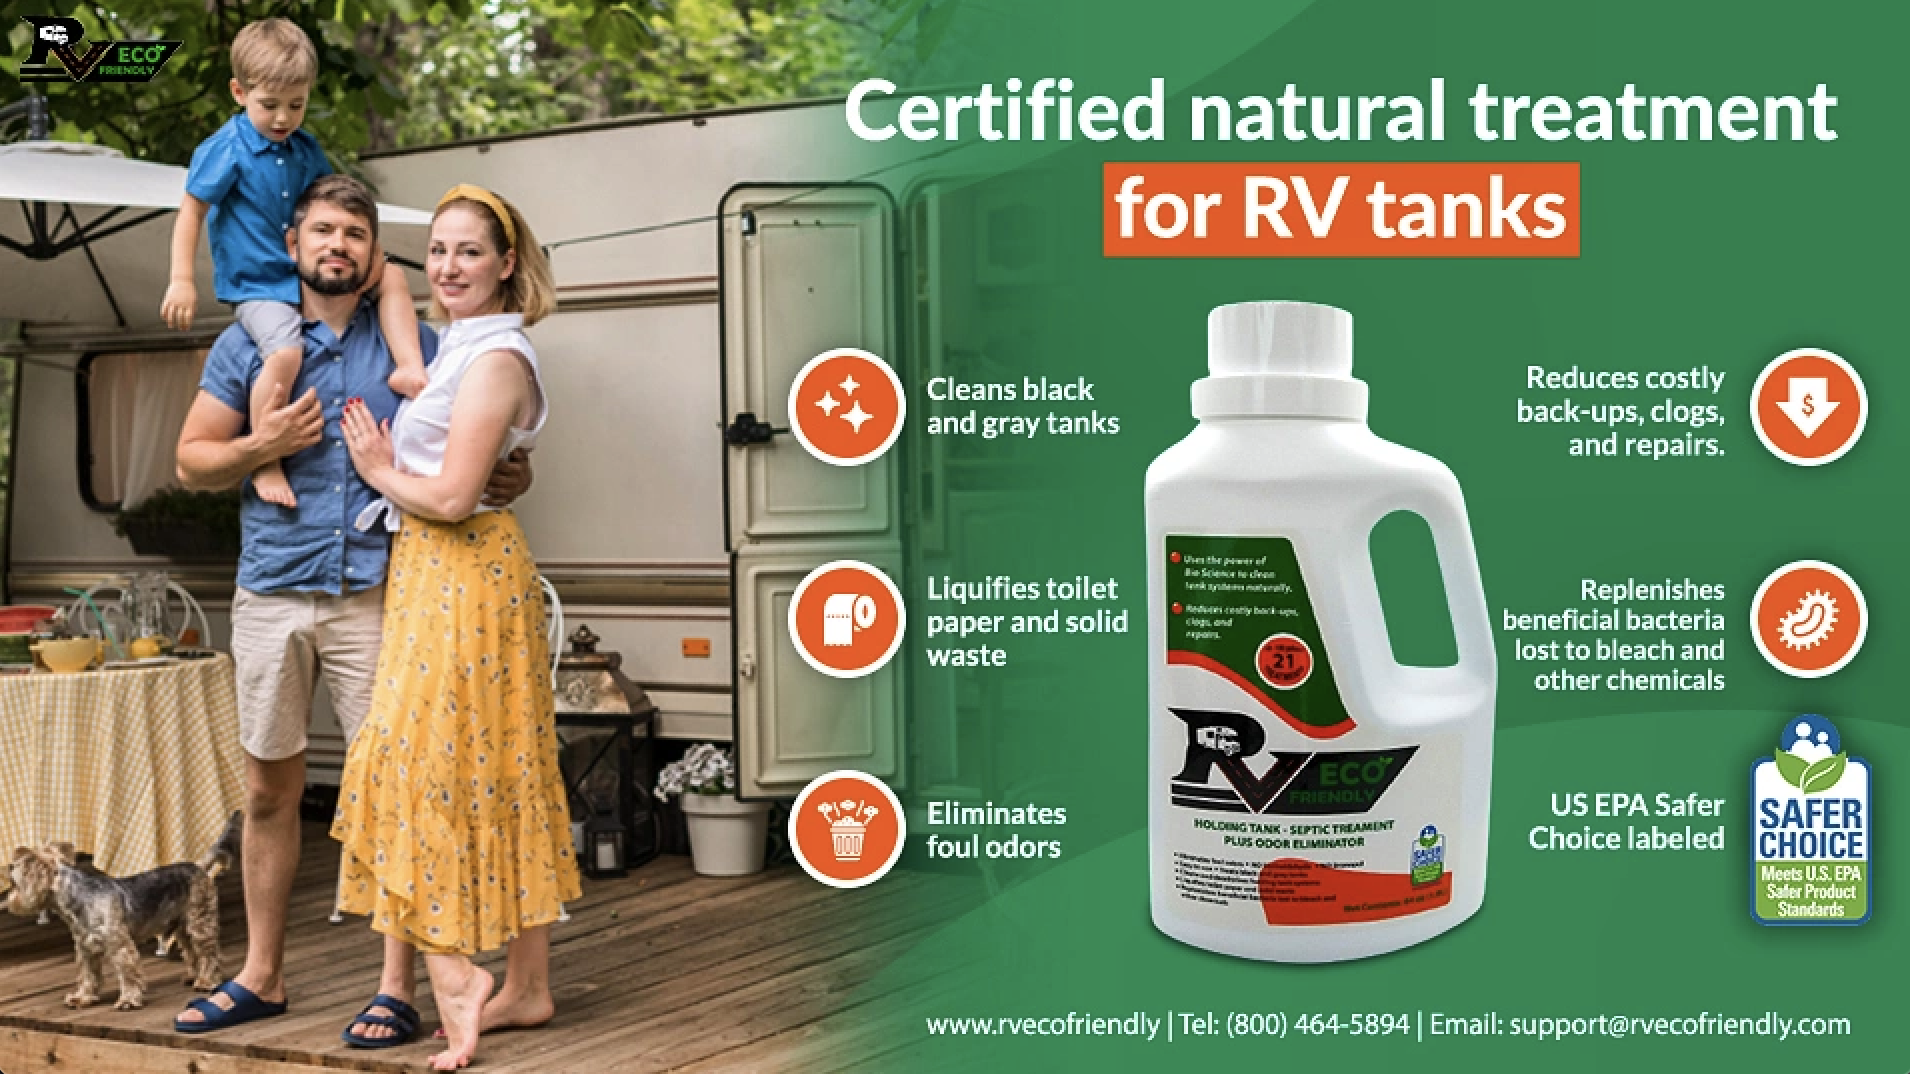 RVecofriendly certified natural treatment for RV tanks